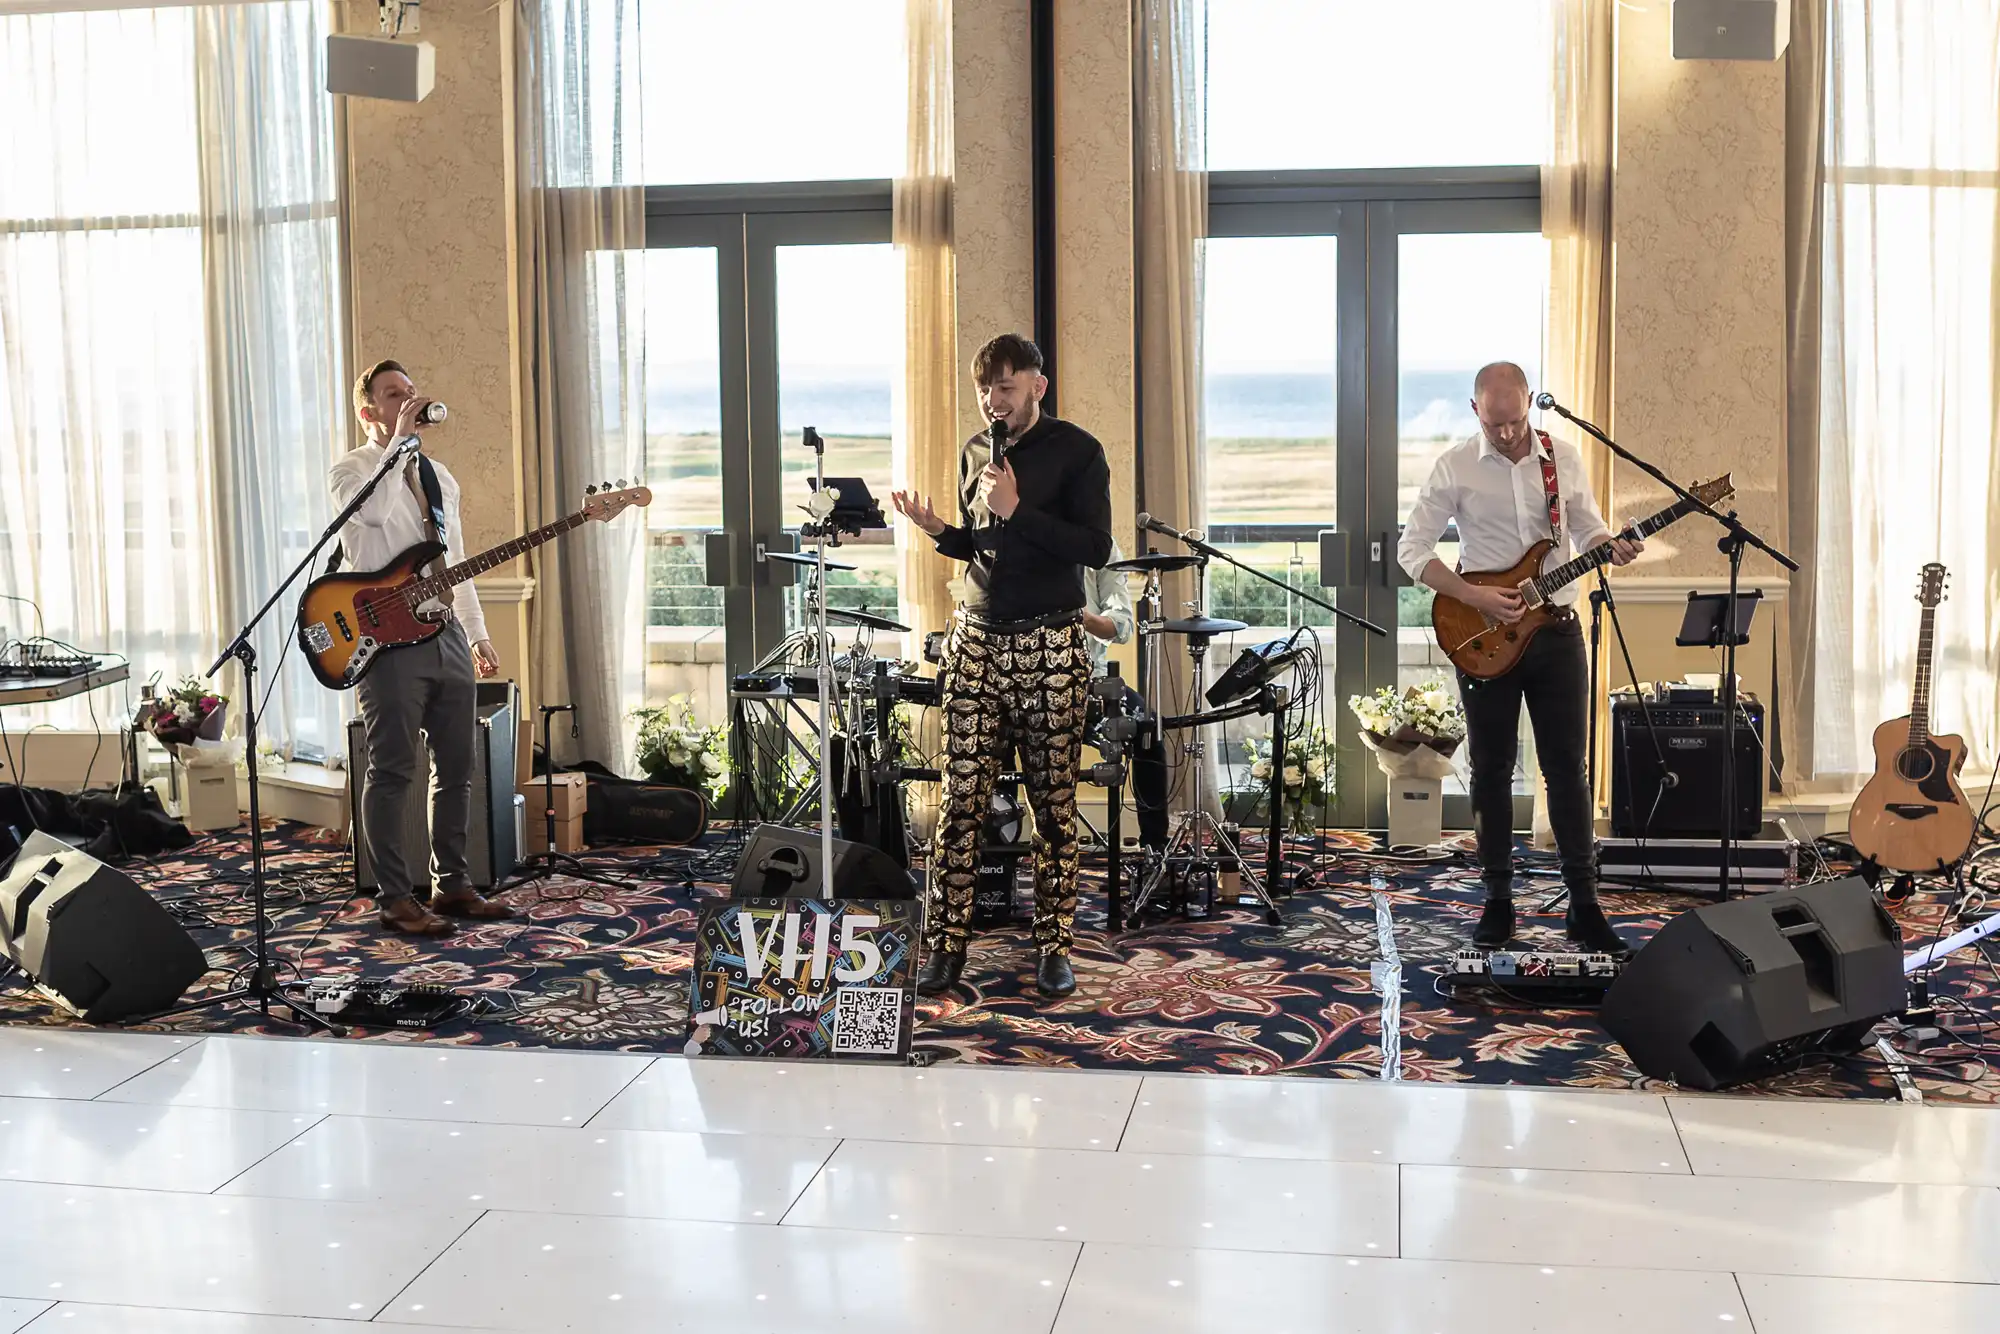 Three musicians performing indoors with ocean view, featuring a singer, and two guitarists, one also using a keyboard.